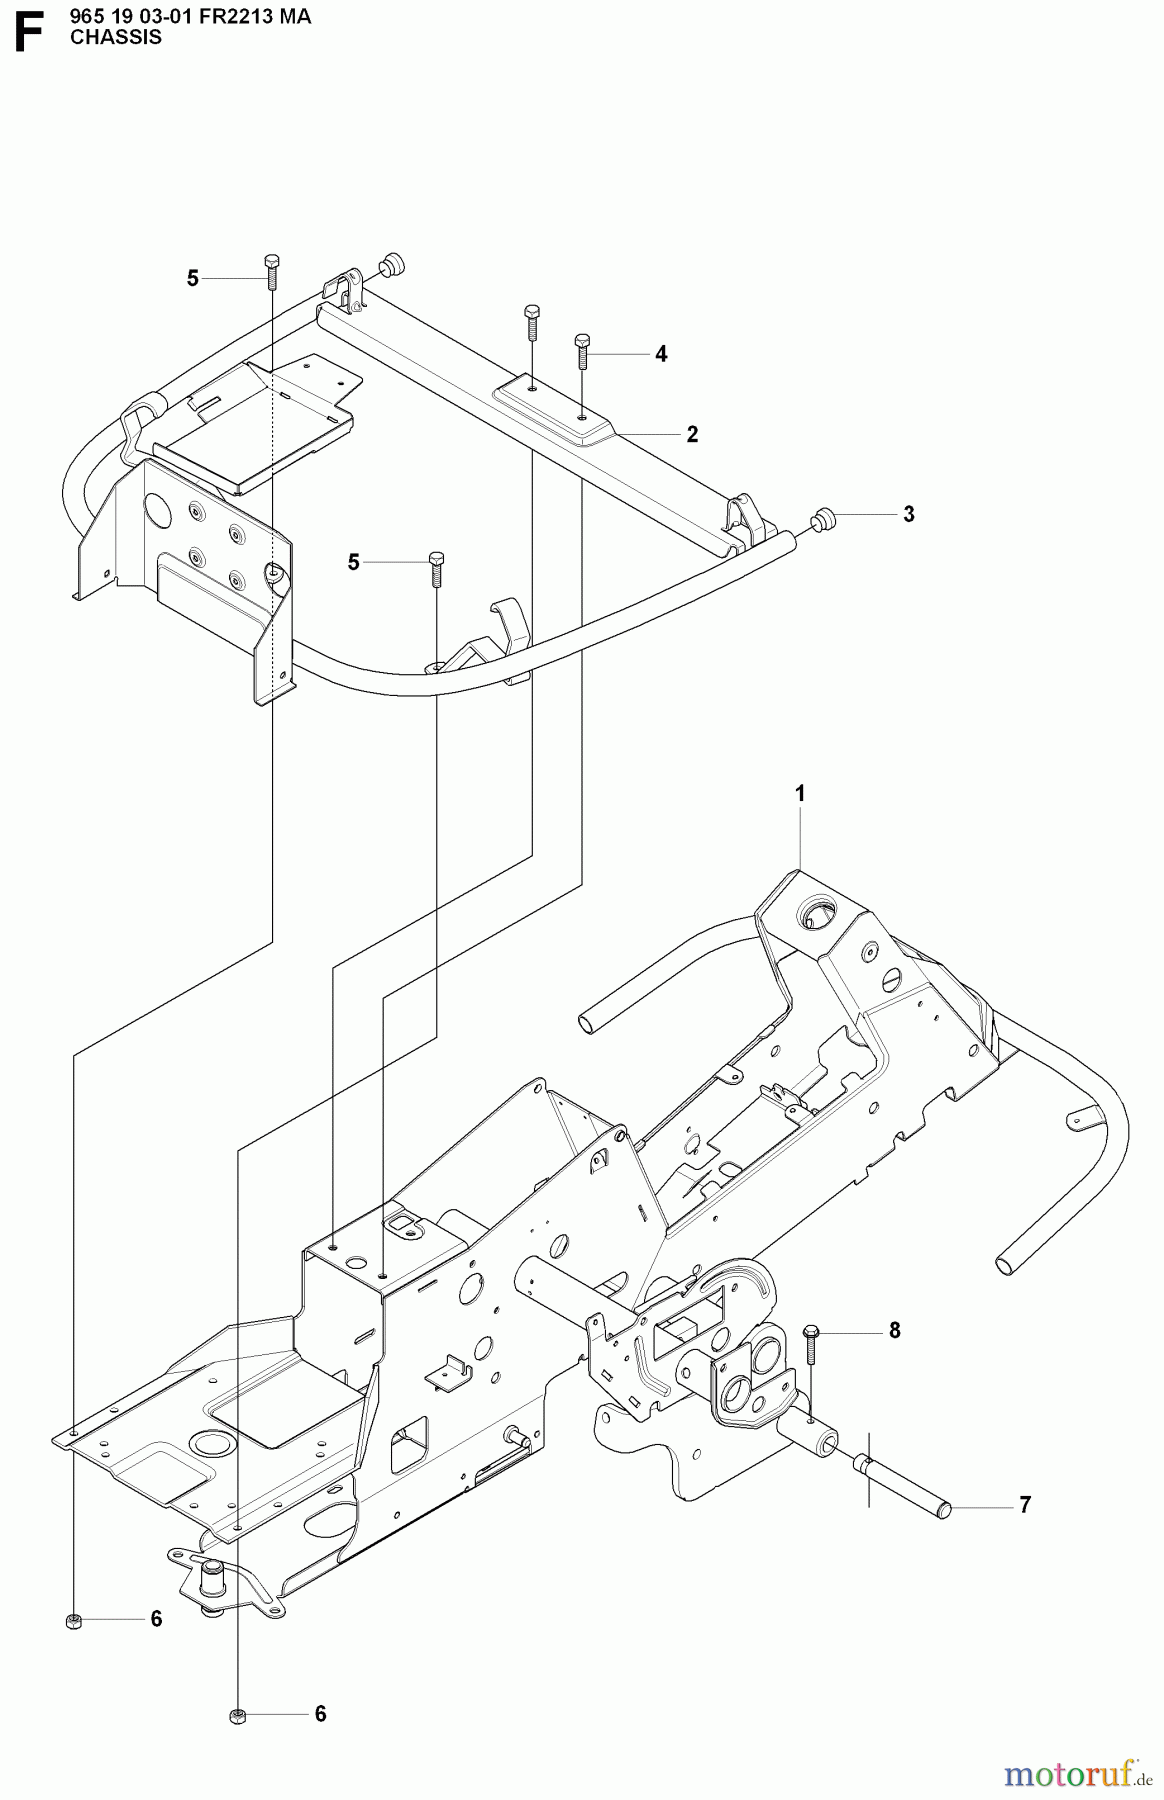  Jonsered Reitermäher FR2213 MA (965190301) - Jonsered Rear-Engine Riding Mower (2008-01) CHASSIS ENCLOSURES